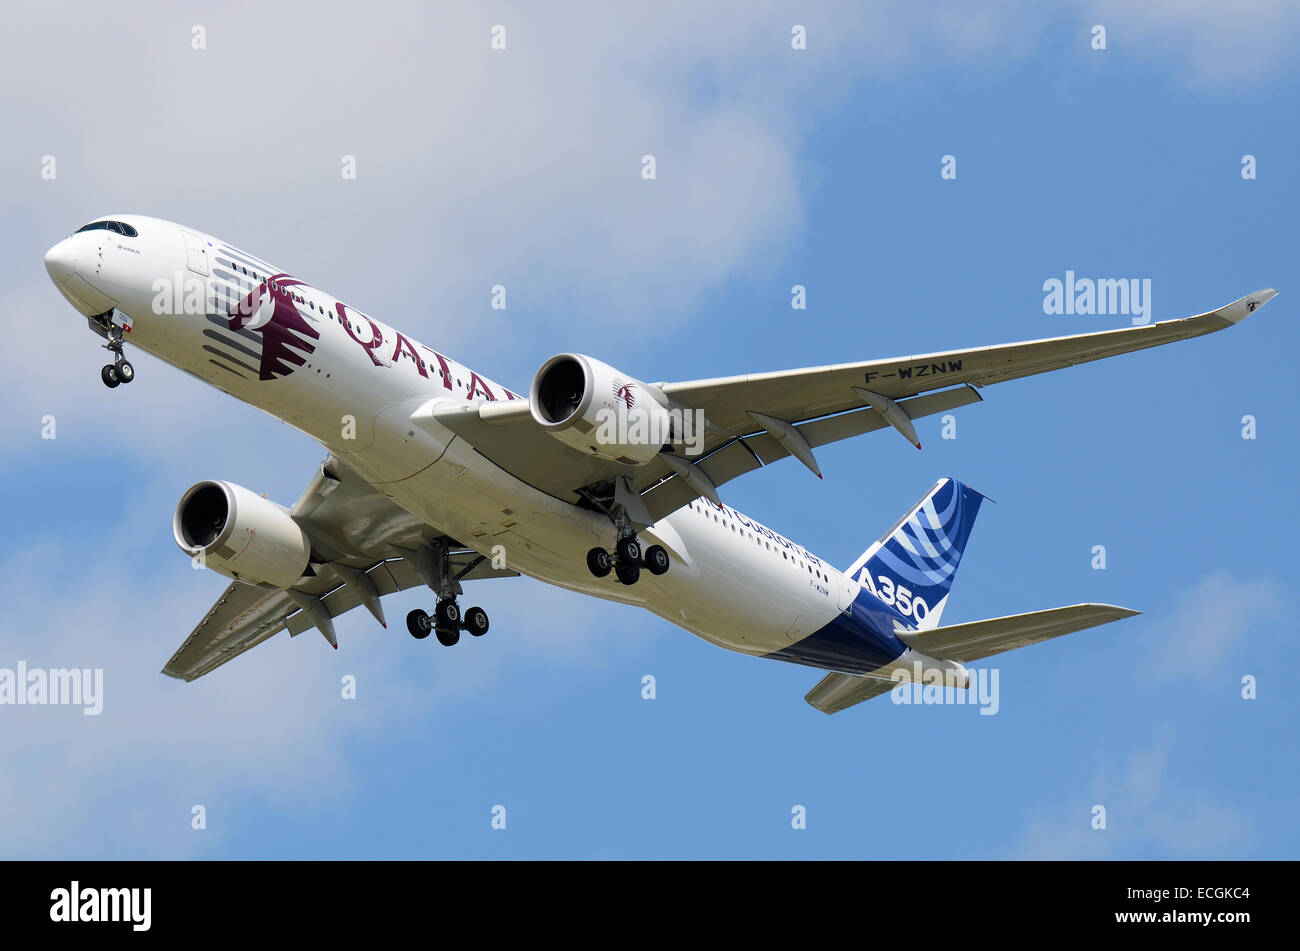 The Airbus A350 XWB is a new family of long-range, twin-engine wide-body jet airliners developed by European manufacturer Airbus Stock Photo